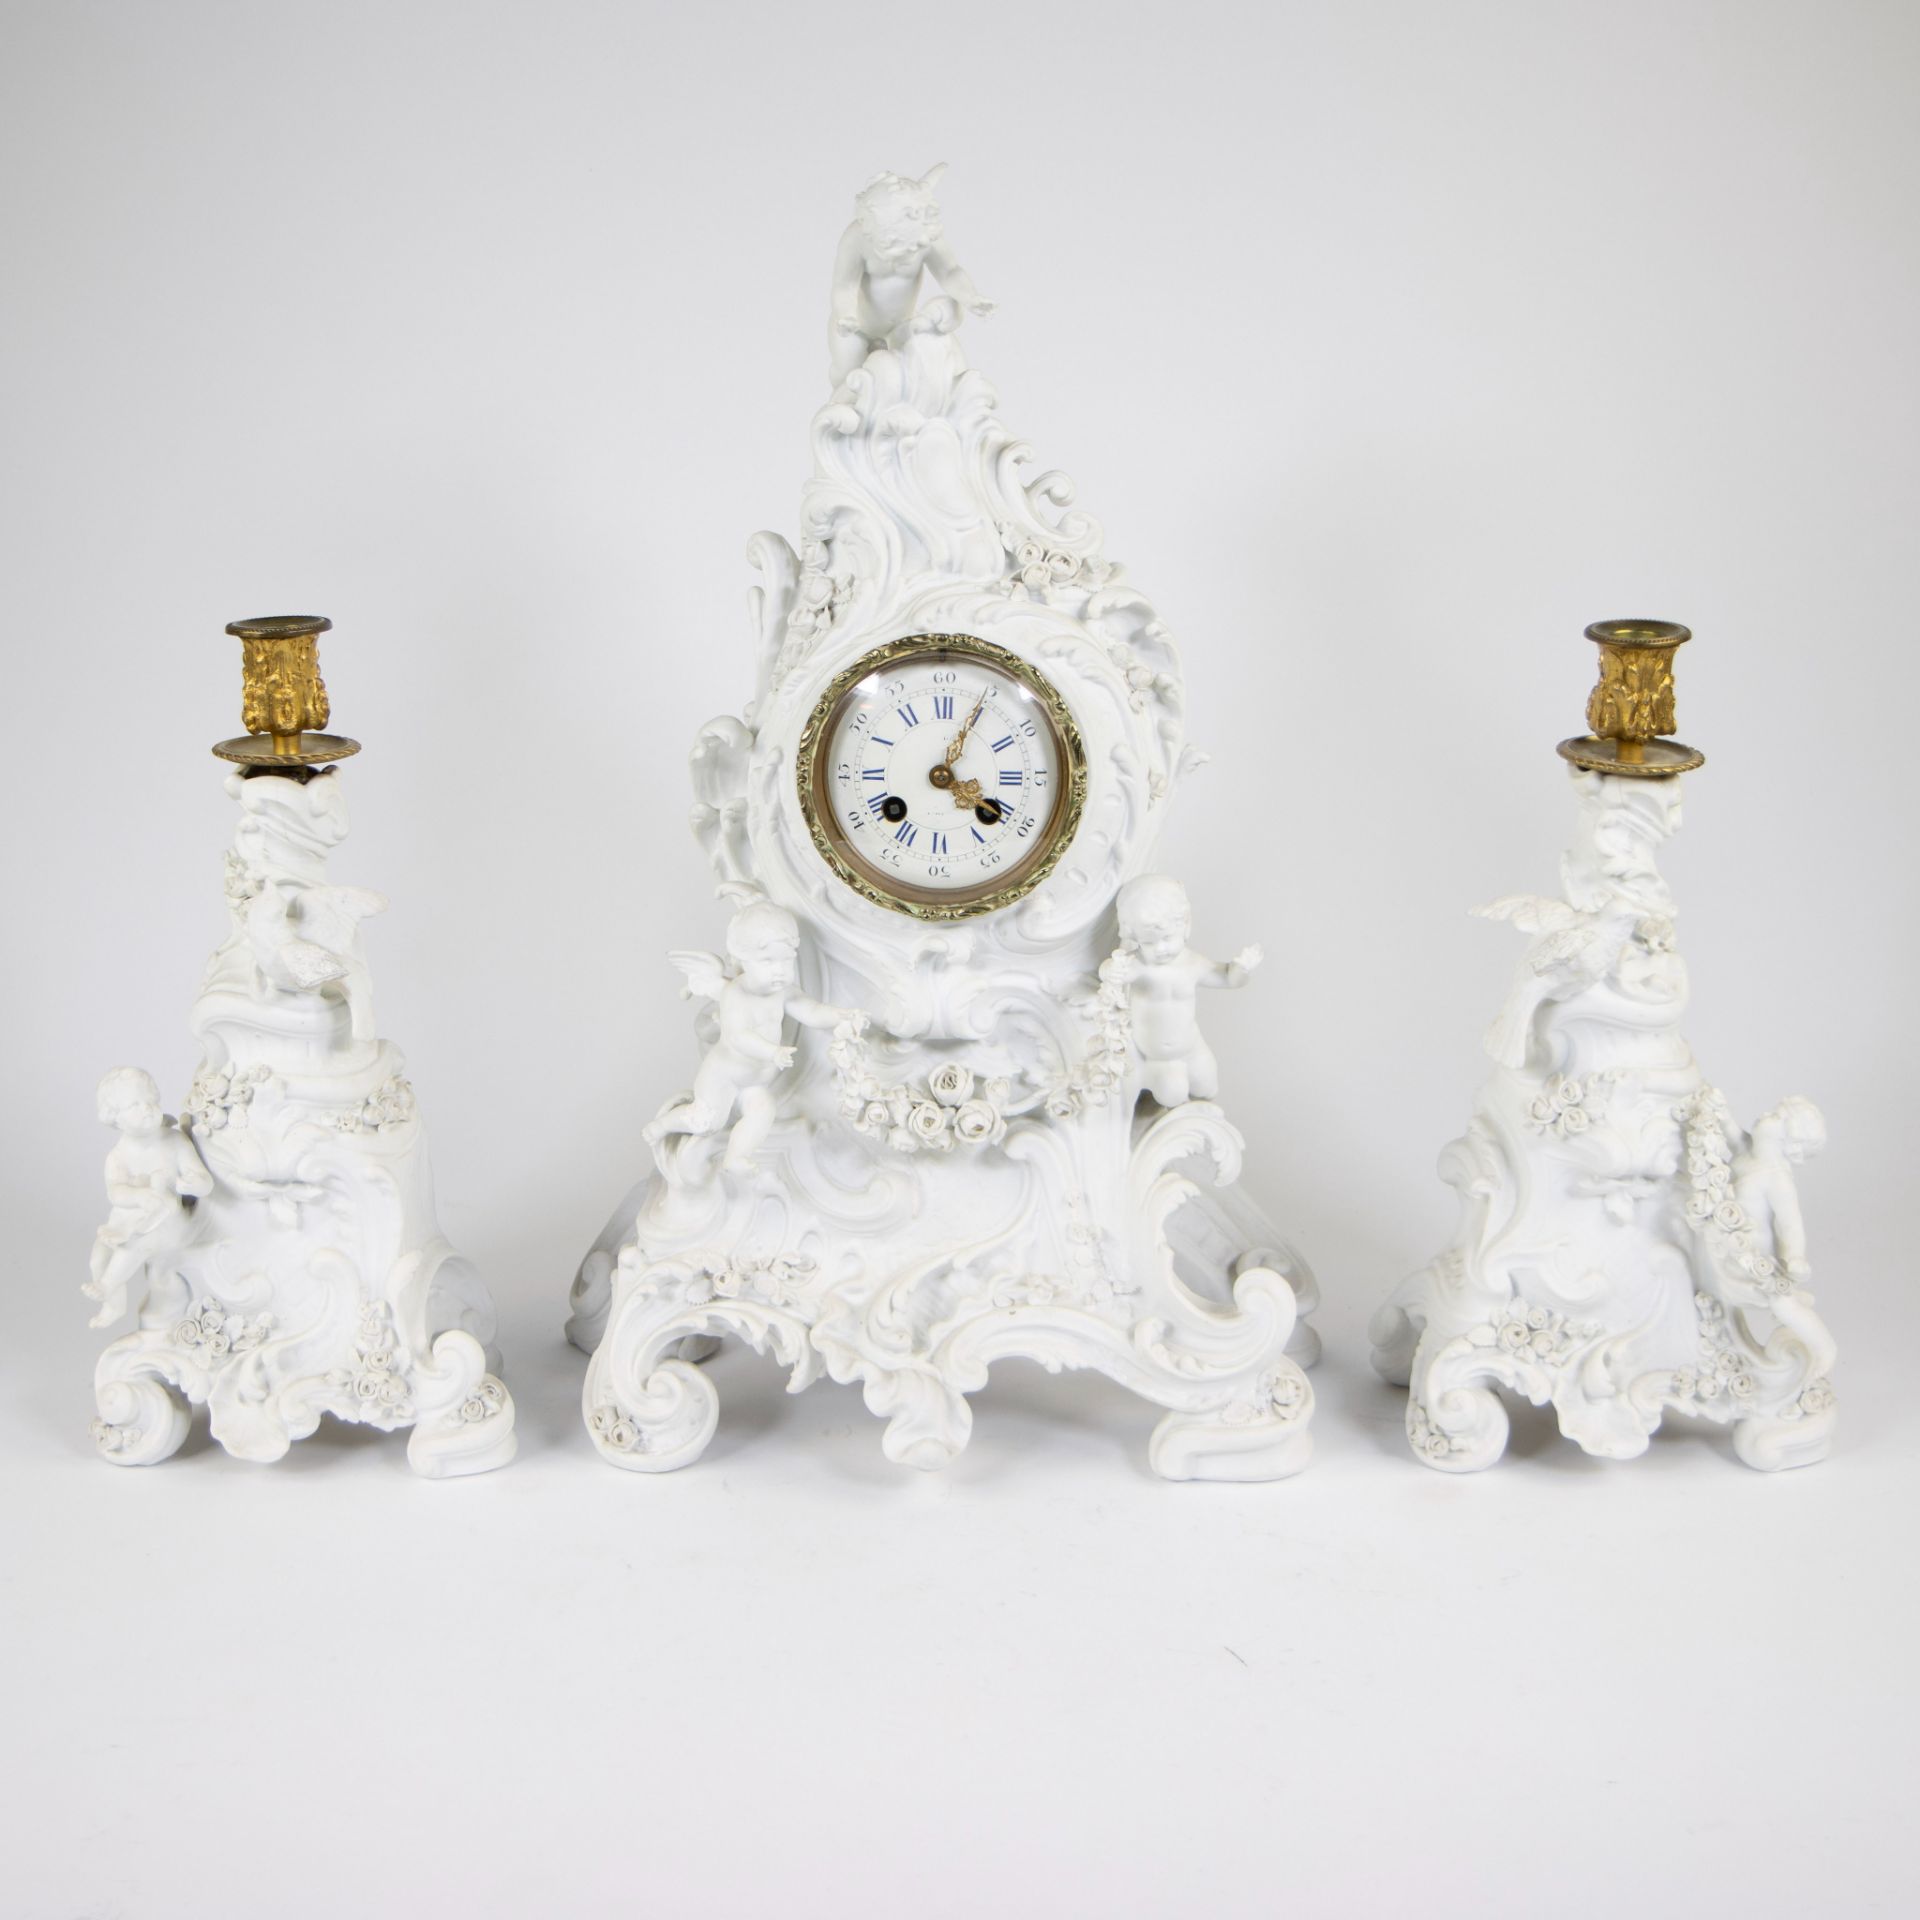 19th century large mantel clock with 2 candlesticks decorated with cherubs. Medal d'argent Marti & C